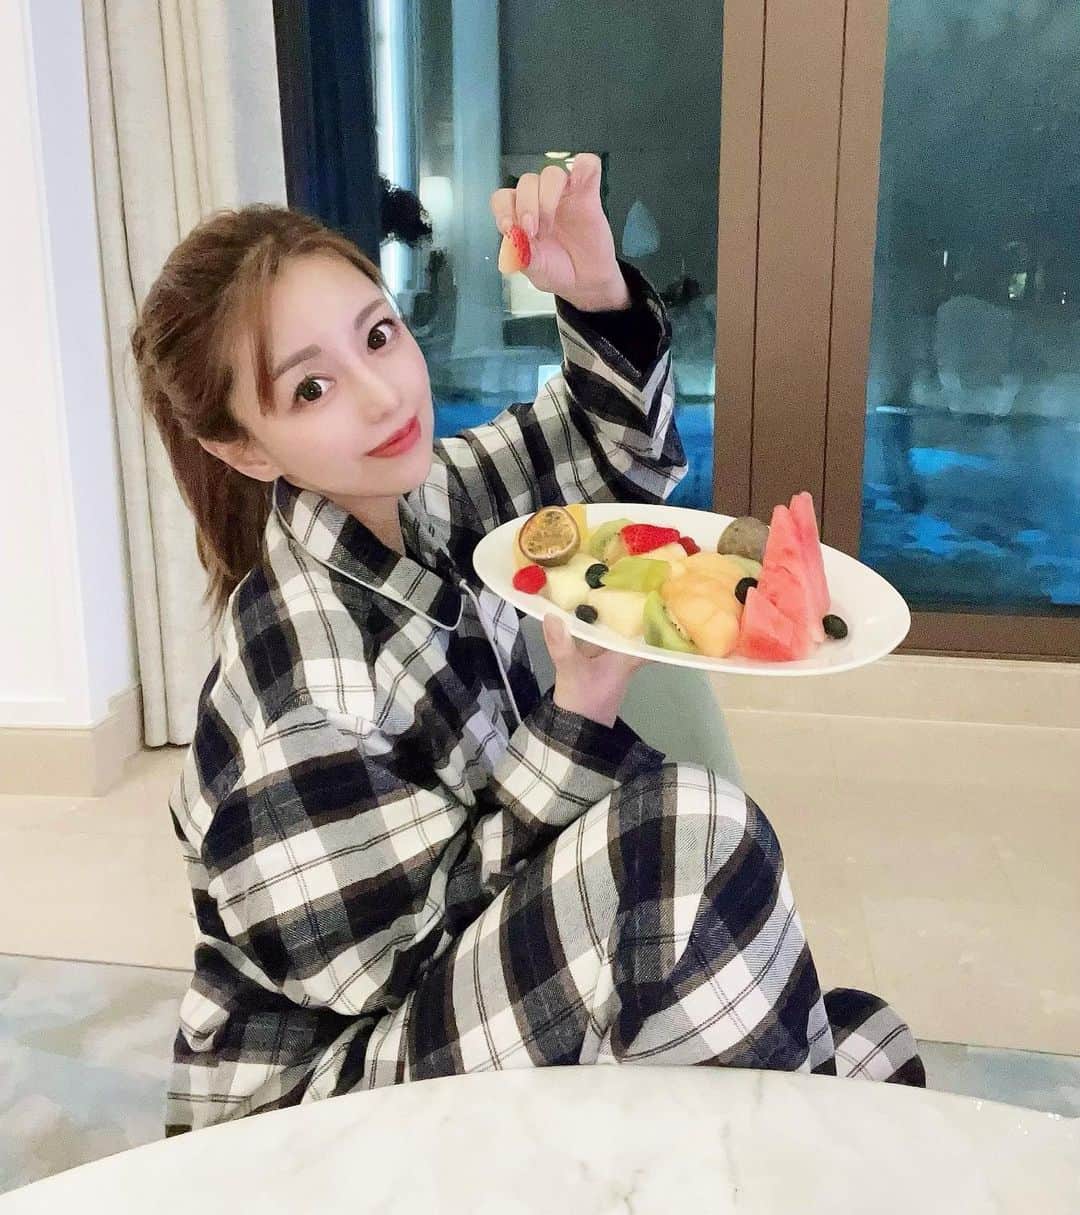 YURIのインスタグラム：「I was hungry in the middle of the night, so I ate a lot late night snacks😋 But I ate pasta as well as fruits🤣😥 、 、 、 夜食たいむ🍓🍊🍇🍈 、 、 、 #dubai #atlantisthepalm #nightsnack #nightwear #sleepwear #pajamas #pjs #ドバイ #アトランティスザパーム #フルーツ祭り #夜食 #パジャマでおじゃま」